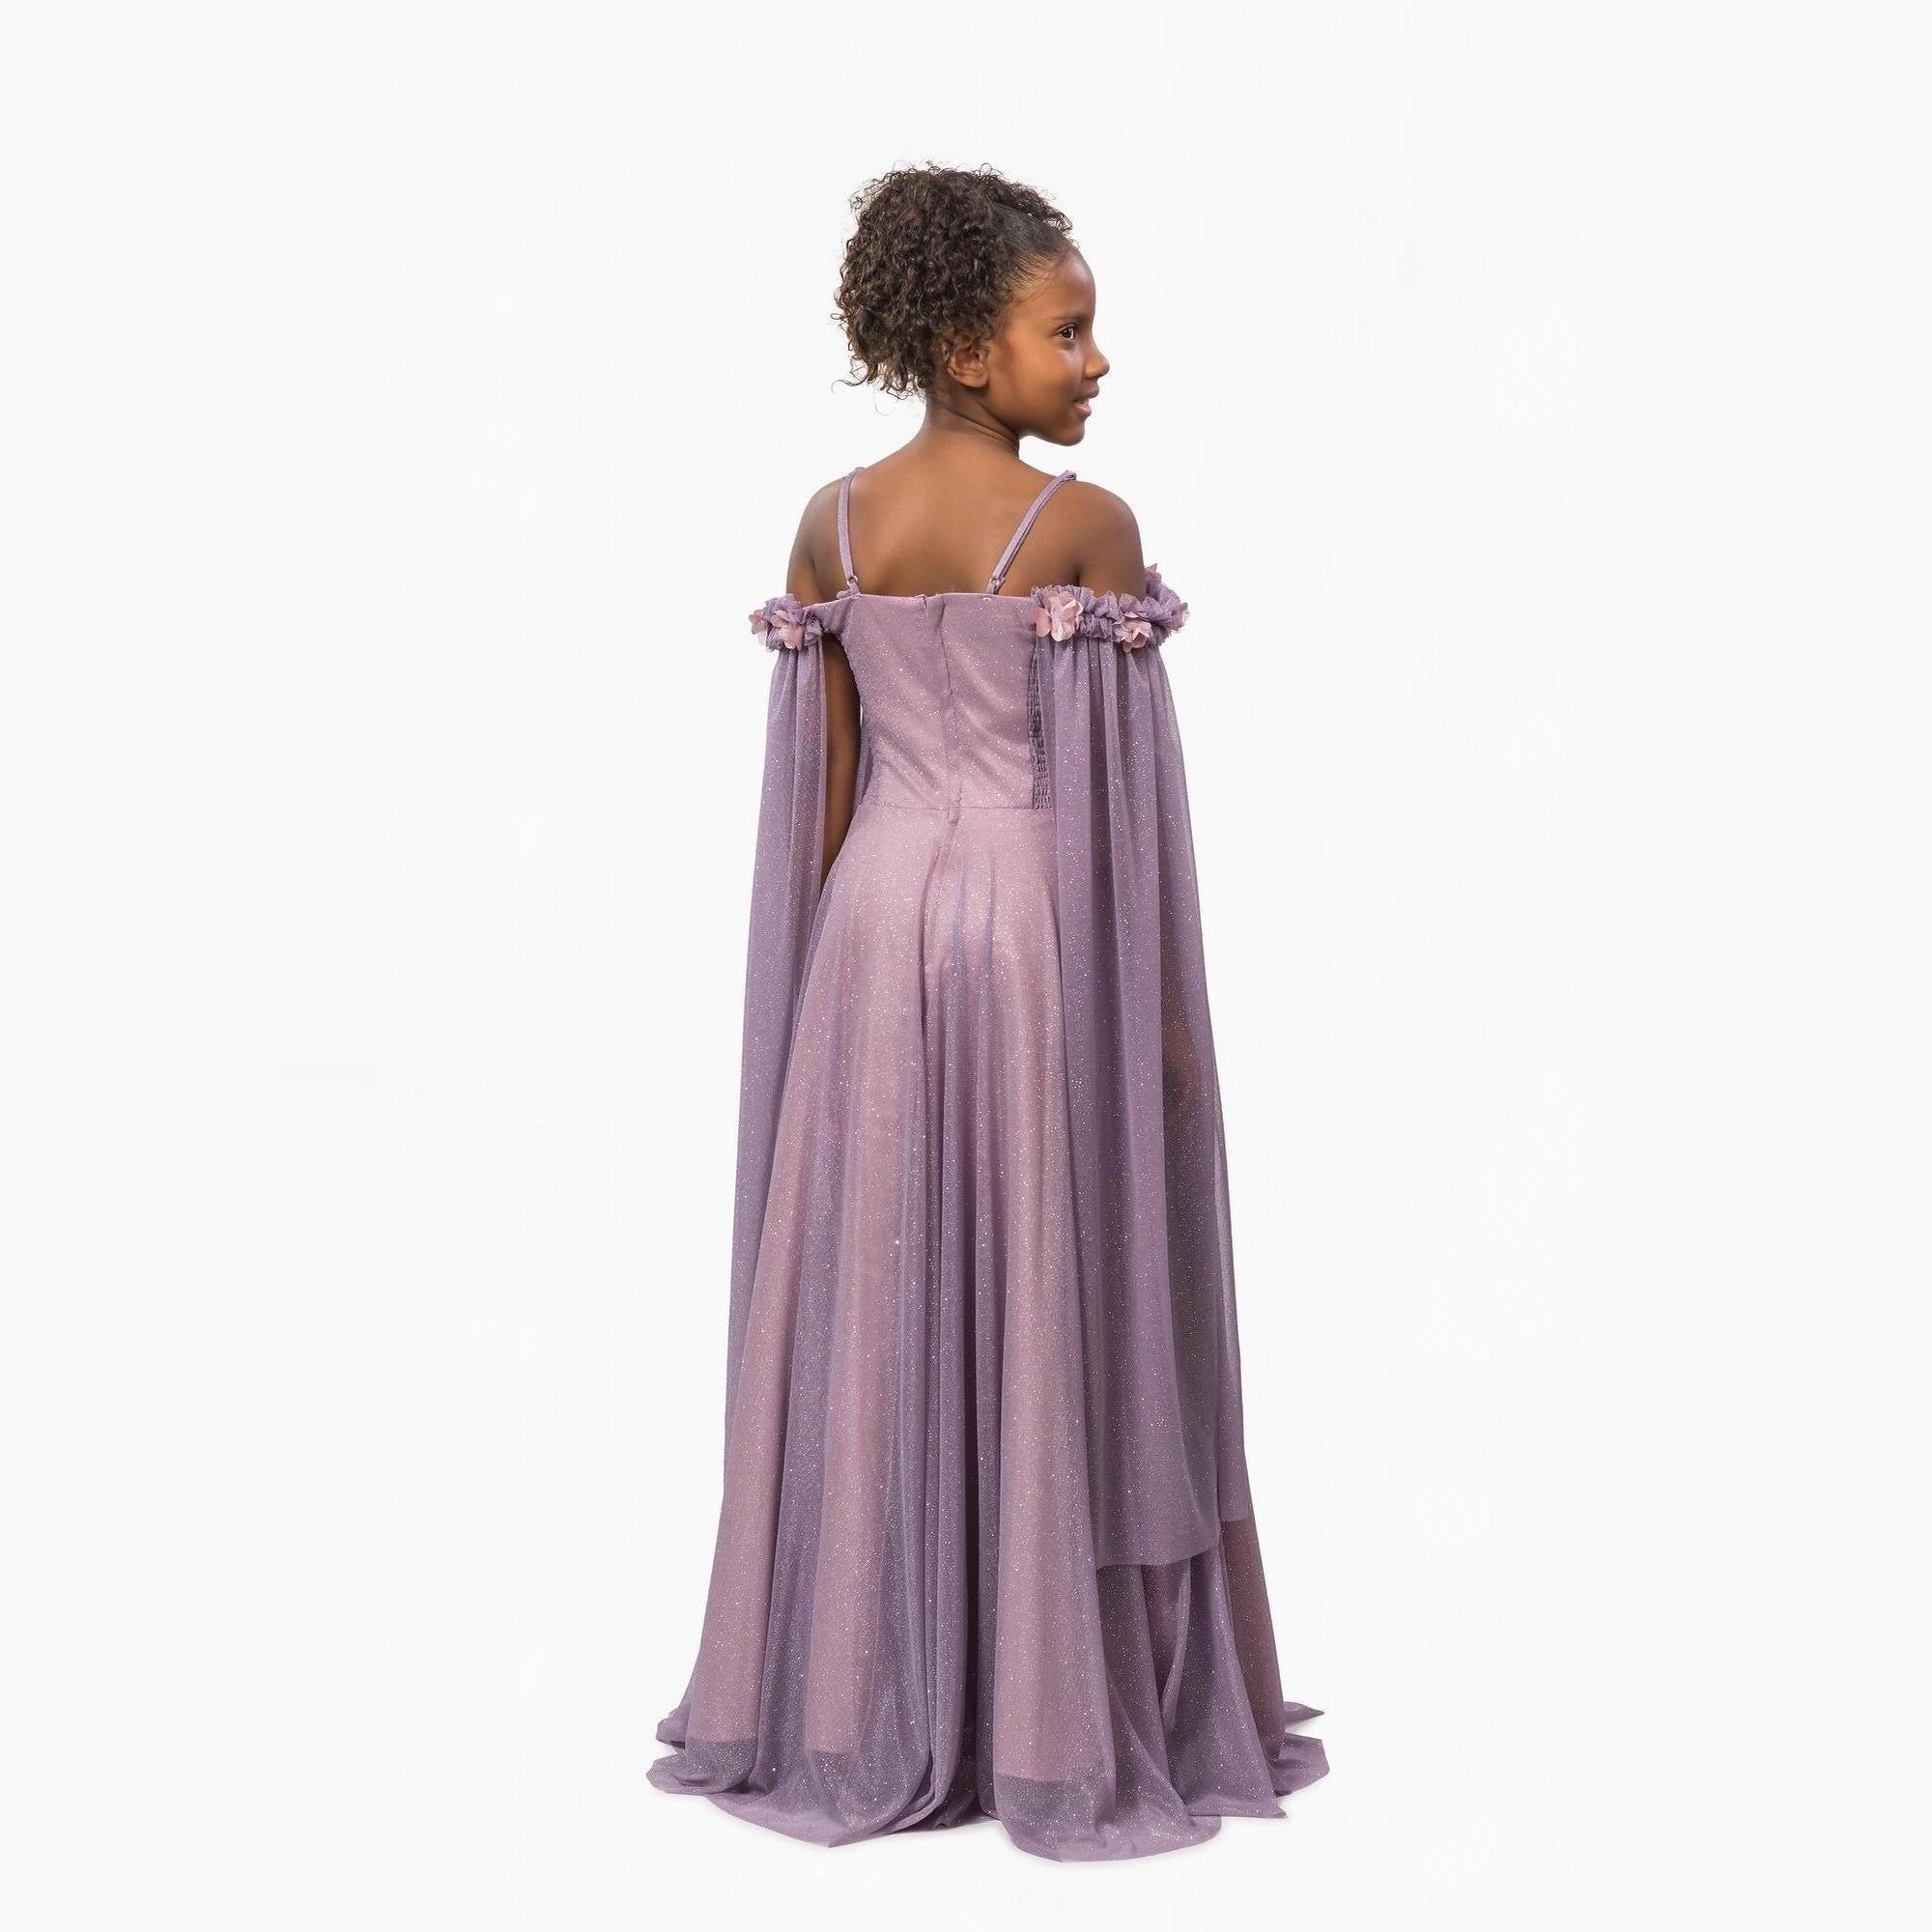 Beyonce's Gown Girls Formal Dress